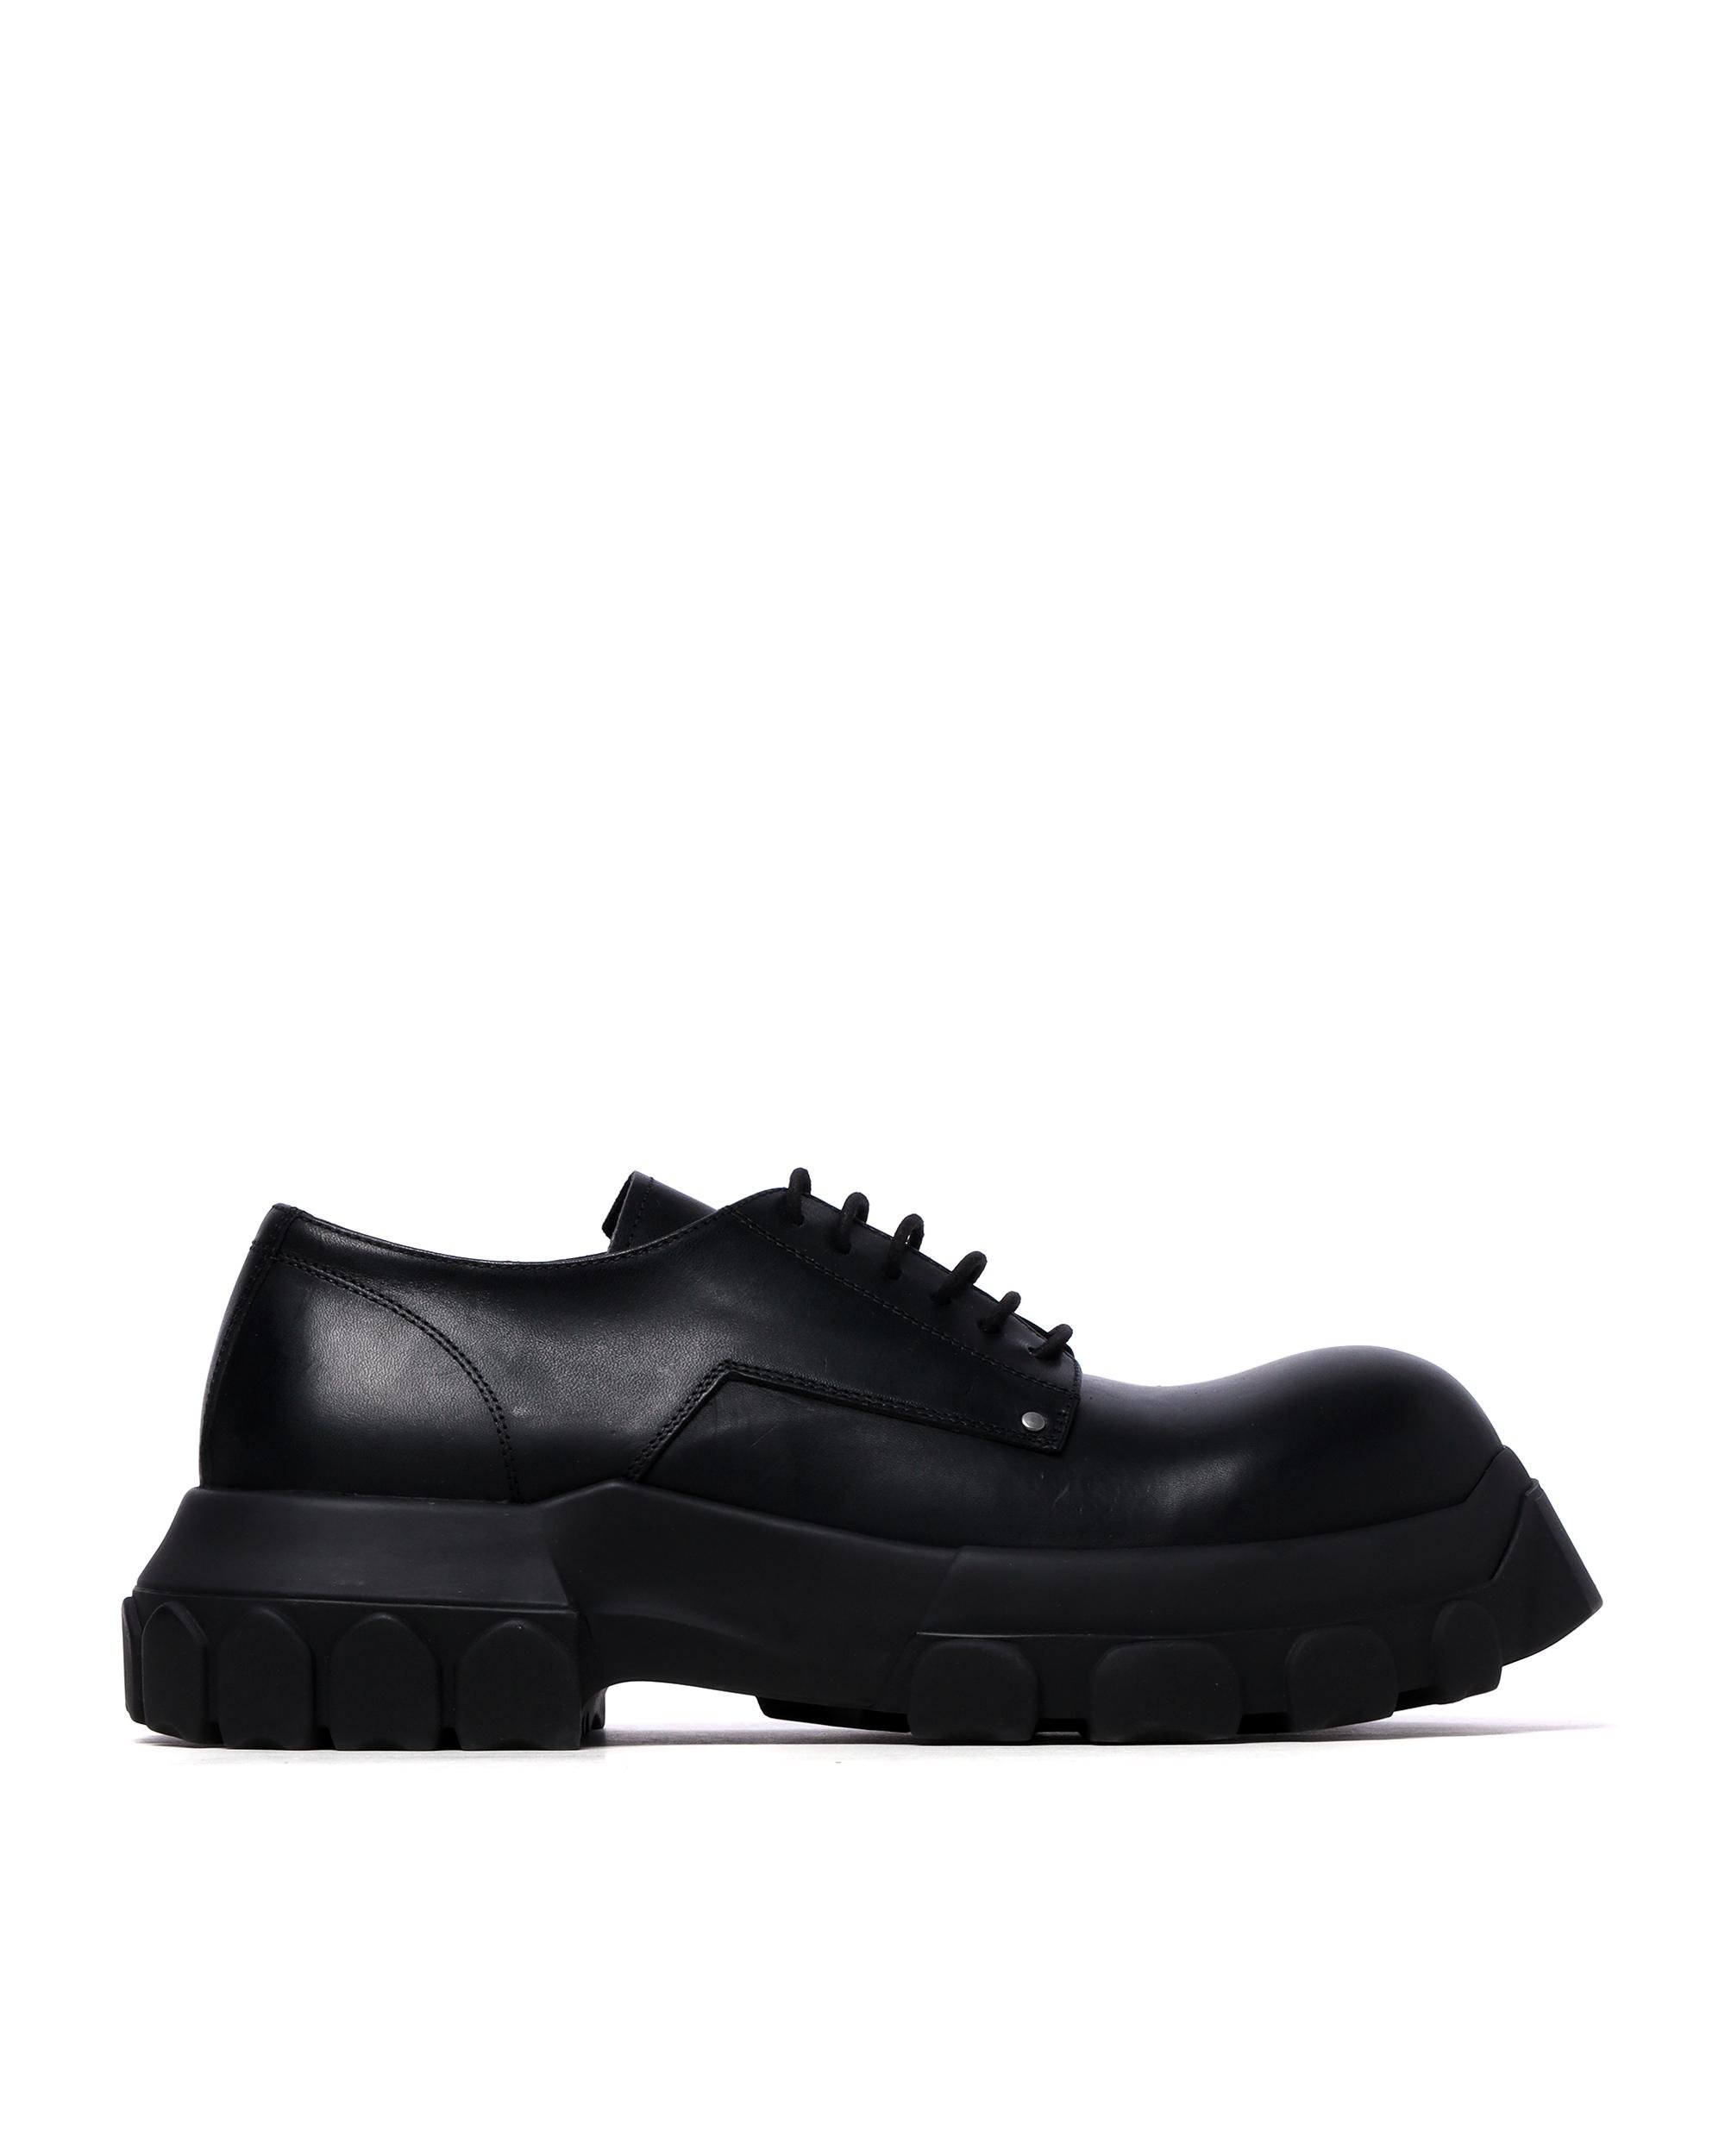 Lace-up bozo tractor shoes by RICK OWENS